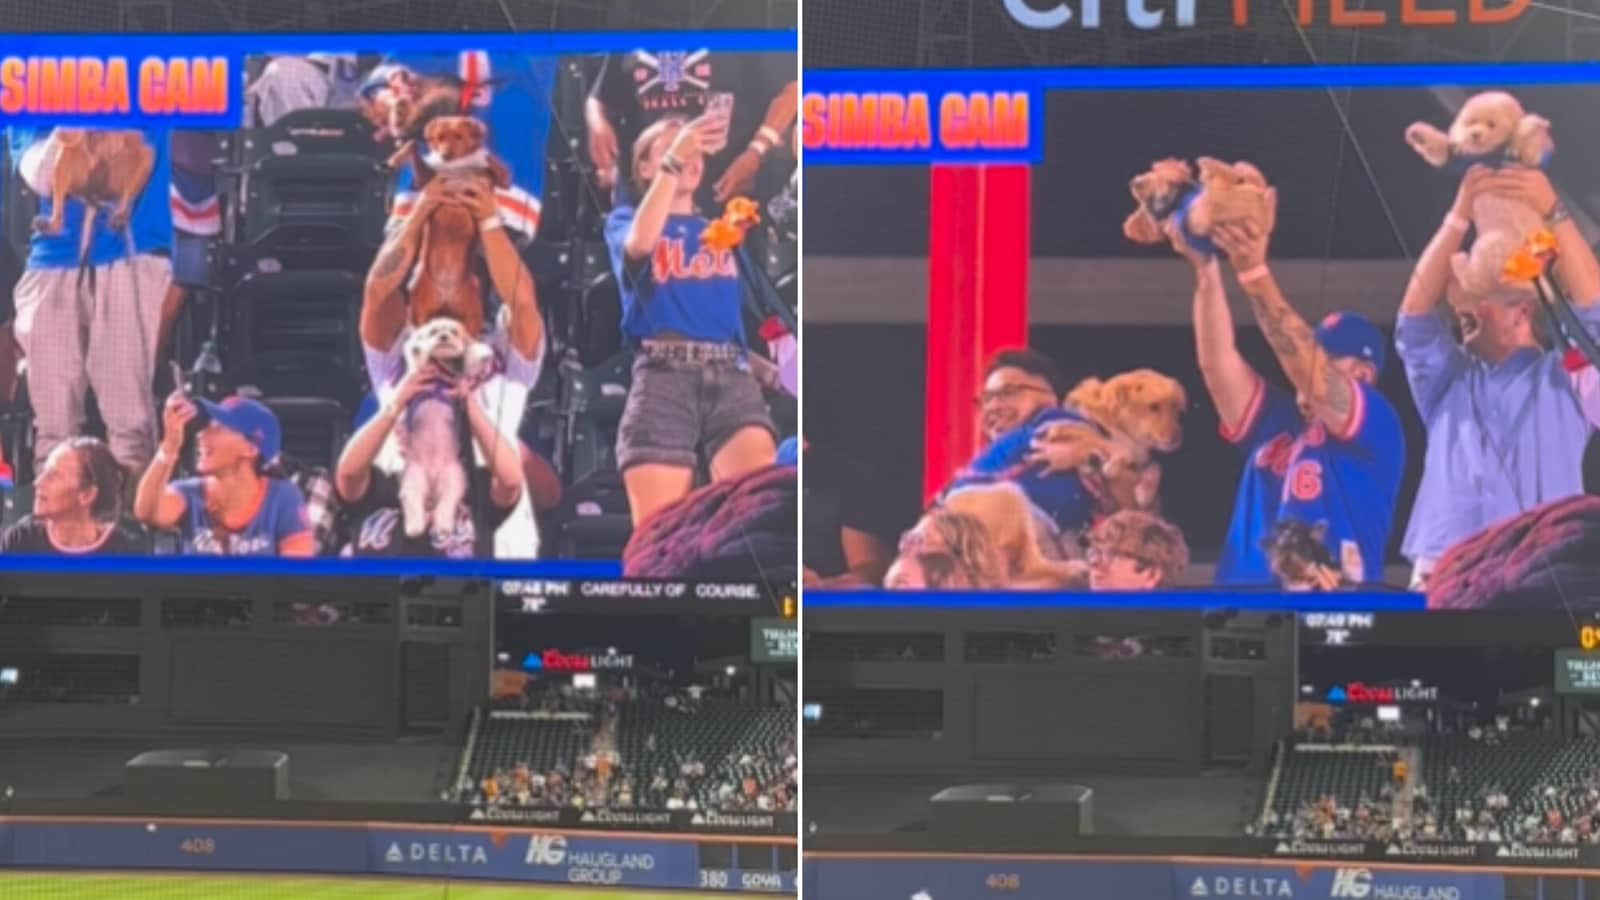 Proud pet parents show off their dogs on ‘Simba Cam’ at a Mets game